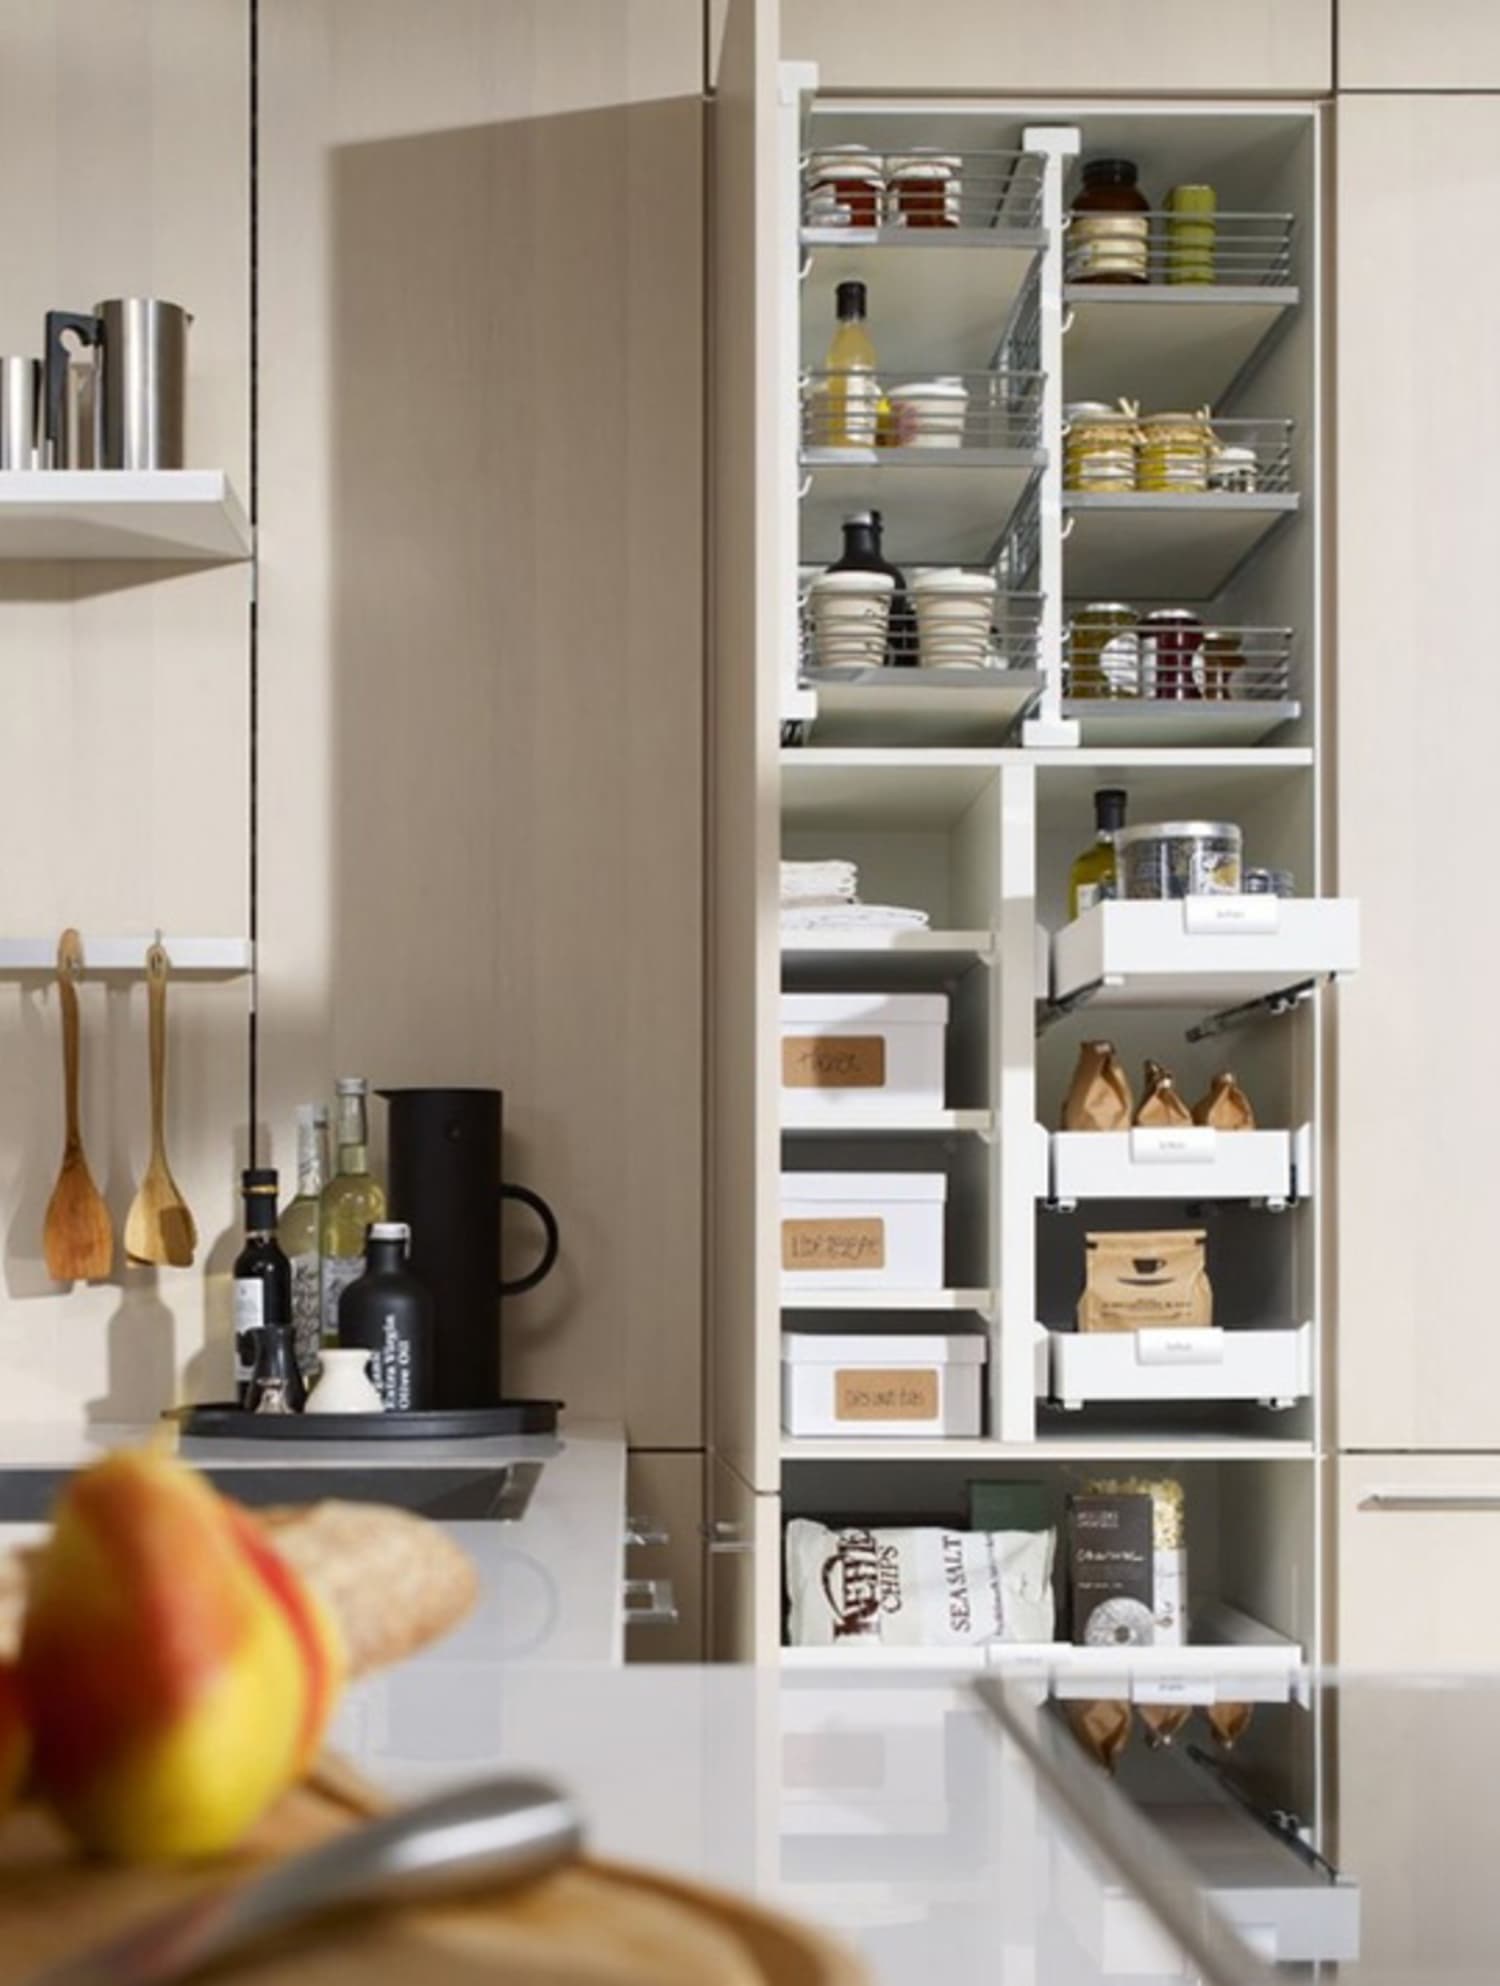 Where to Buy Pull Out Cabinet Shelves and Drawers | Kitchn